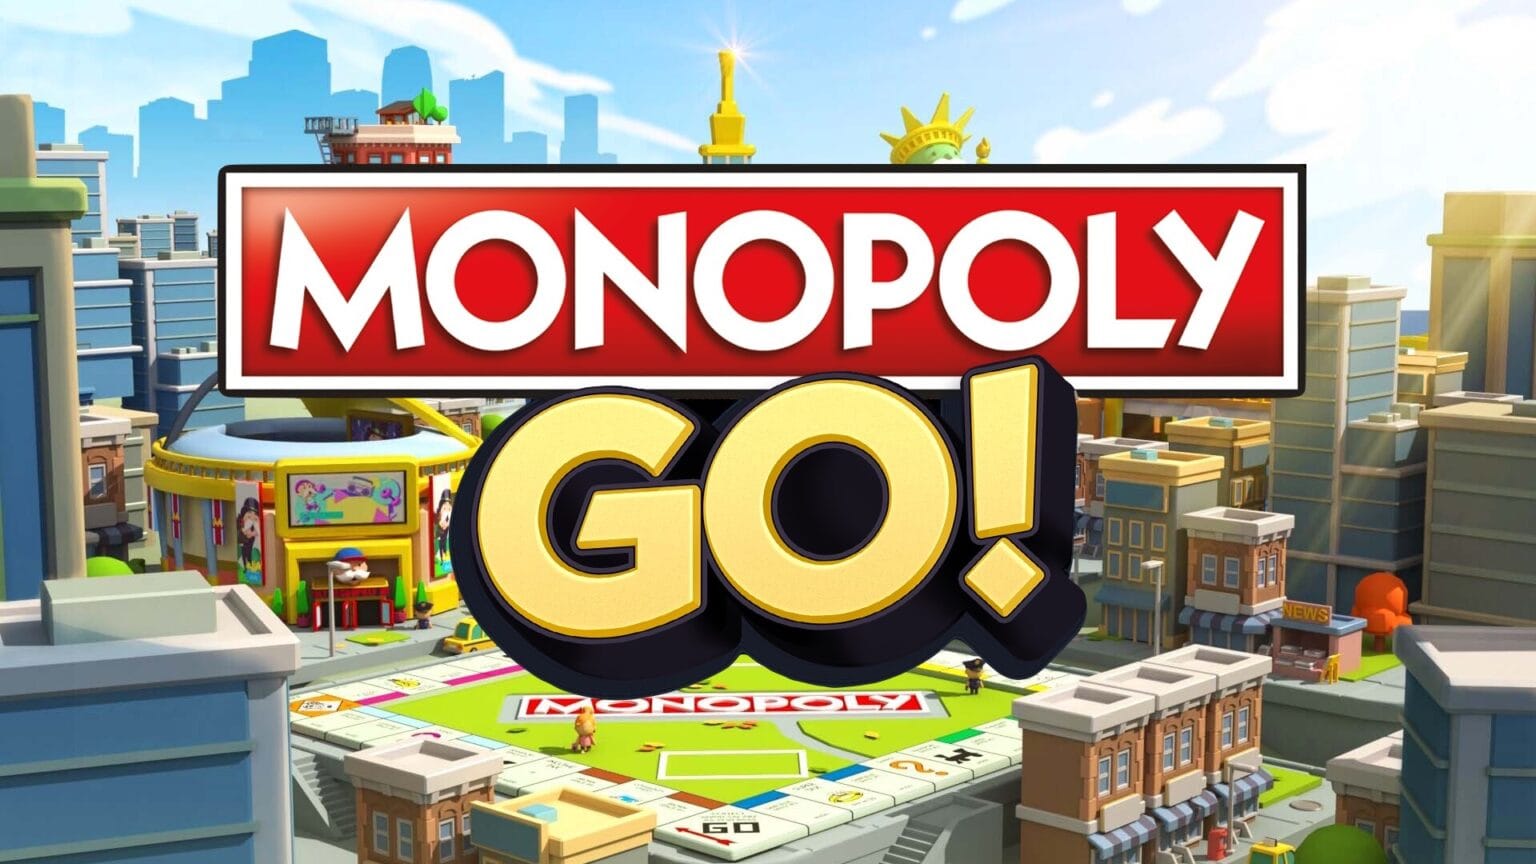 'Monopoly Go!' gives classic board game a new twist